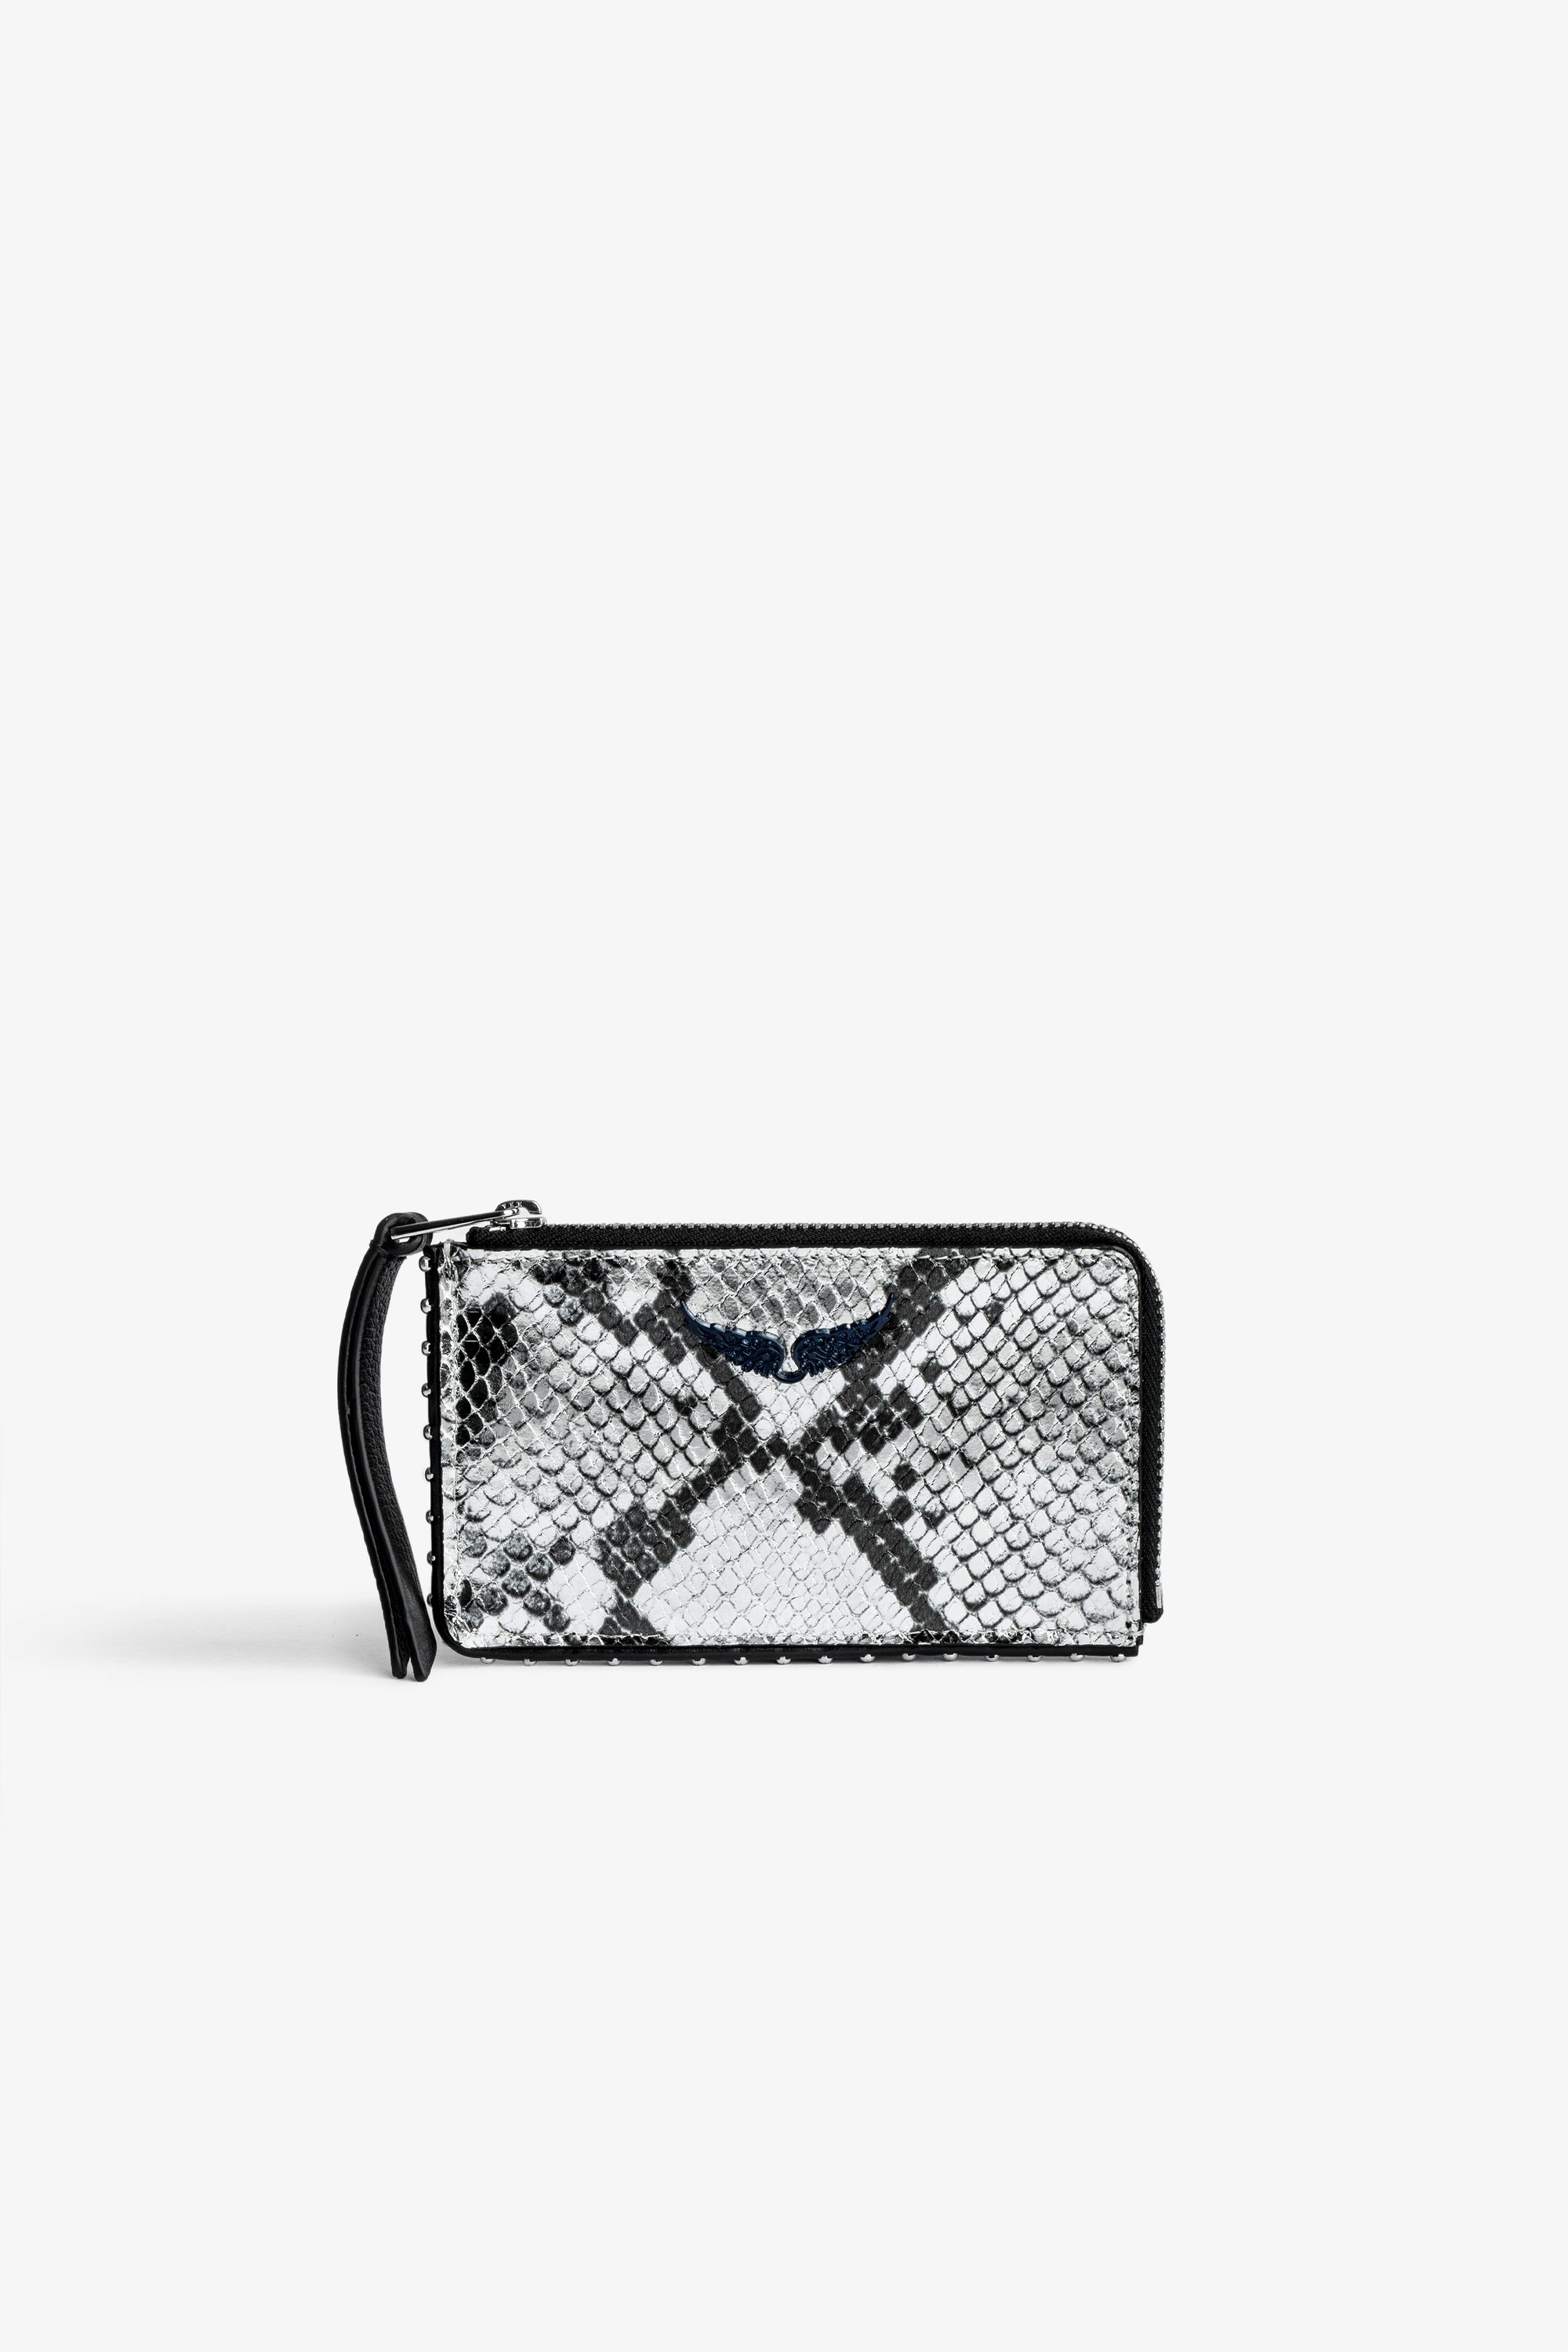 ZV Card 財布 Women’s silver metallic snake-embossed leather zipped card holder with slots and crystal-embellished wings charm